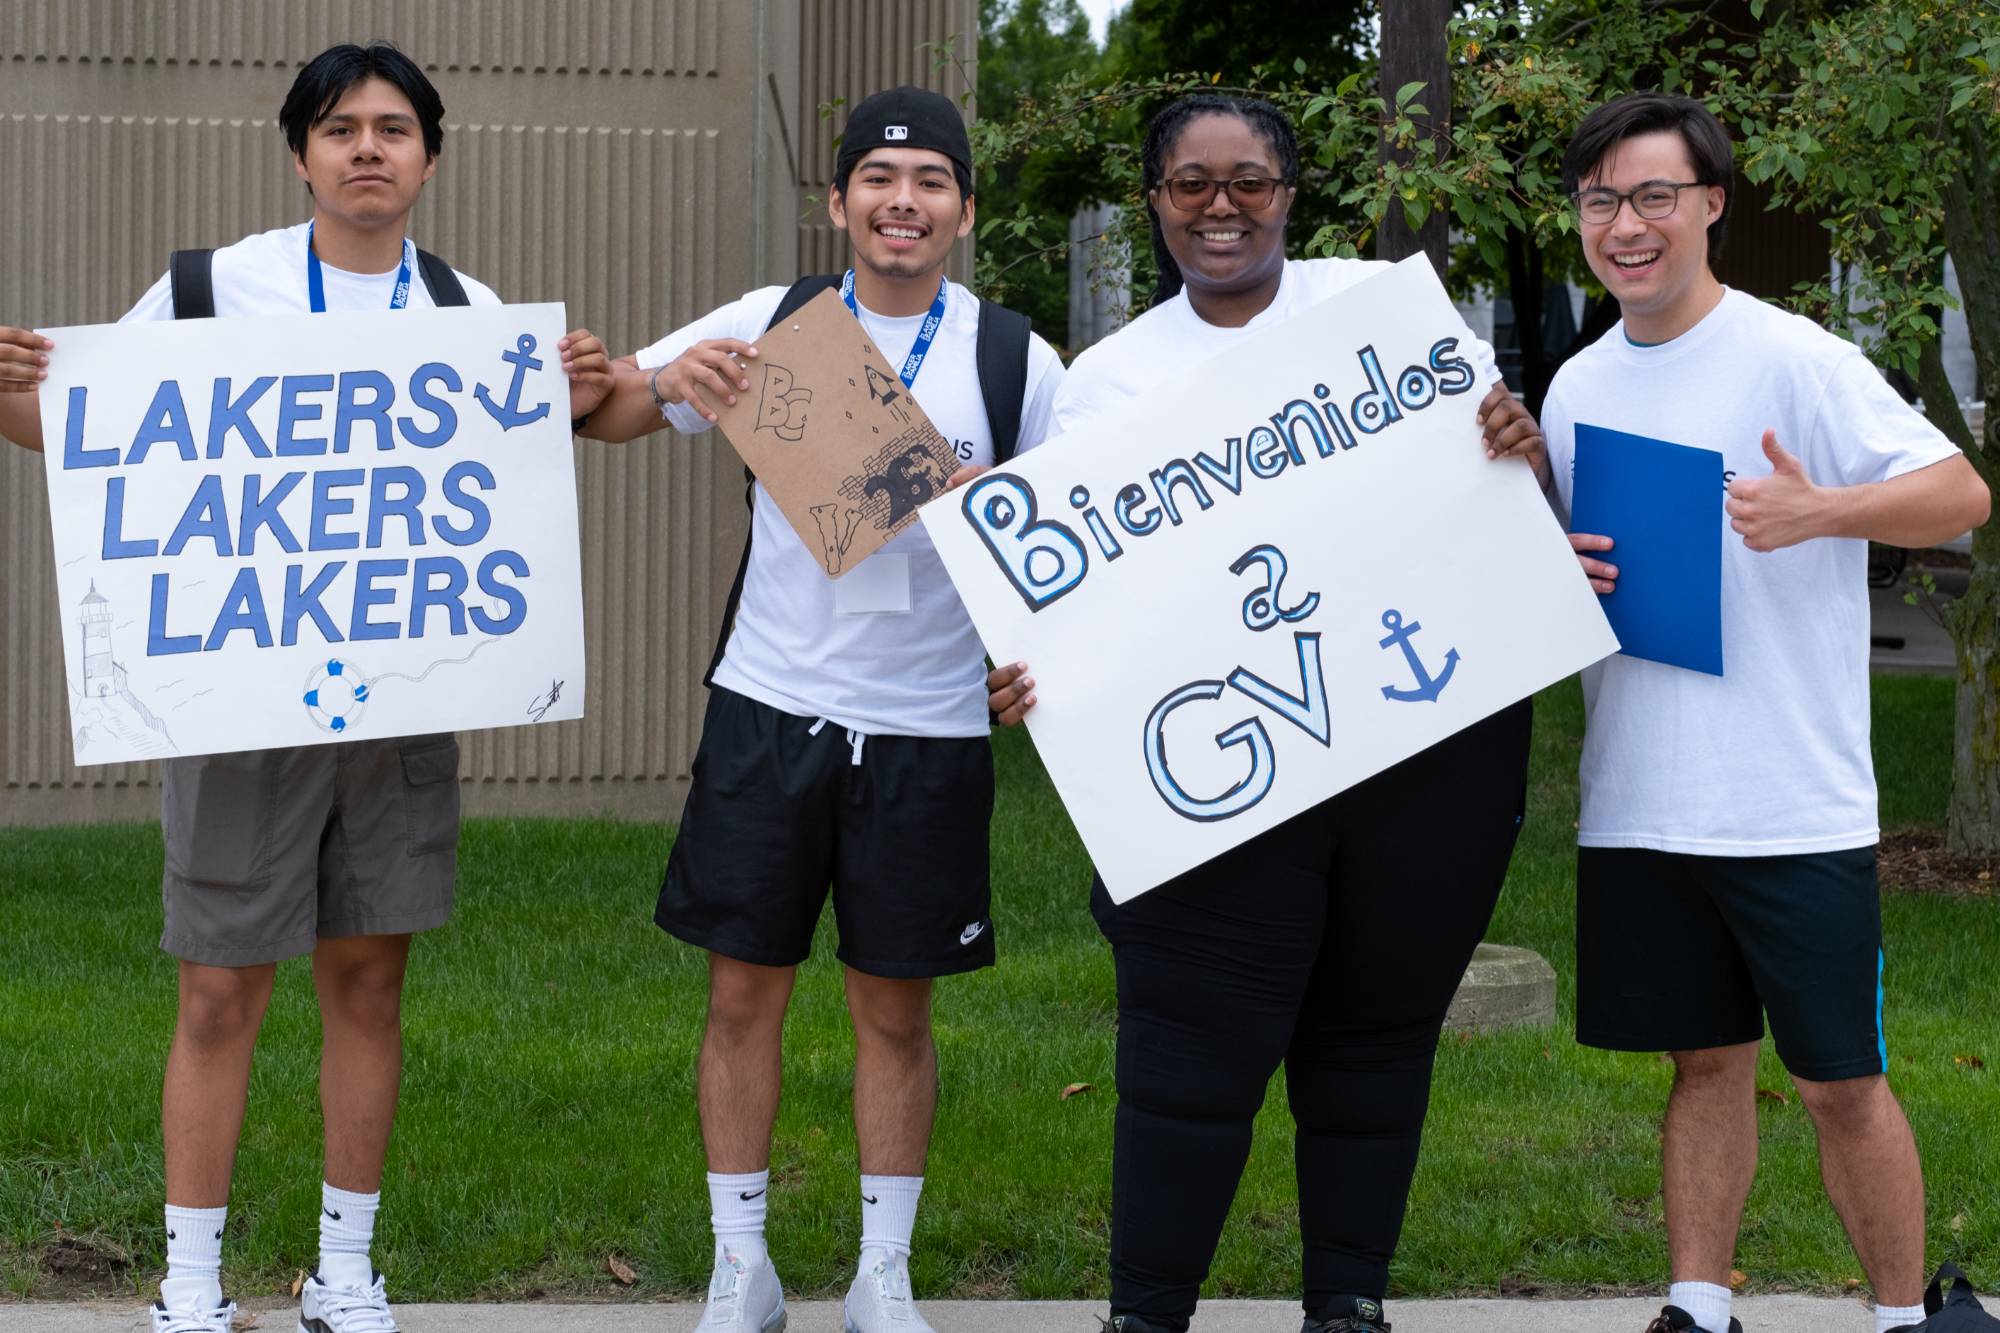 Students holding signs welcoming new students to campus